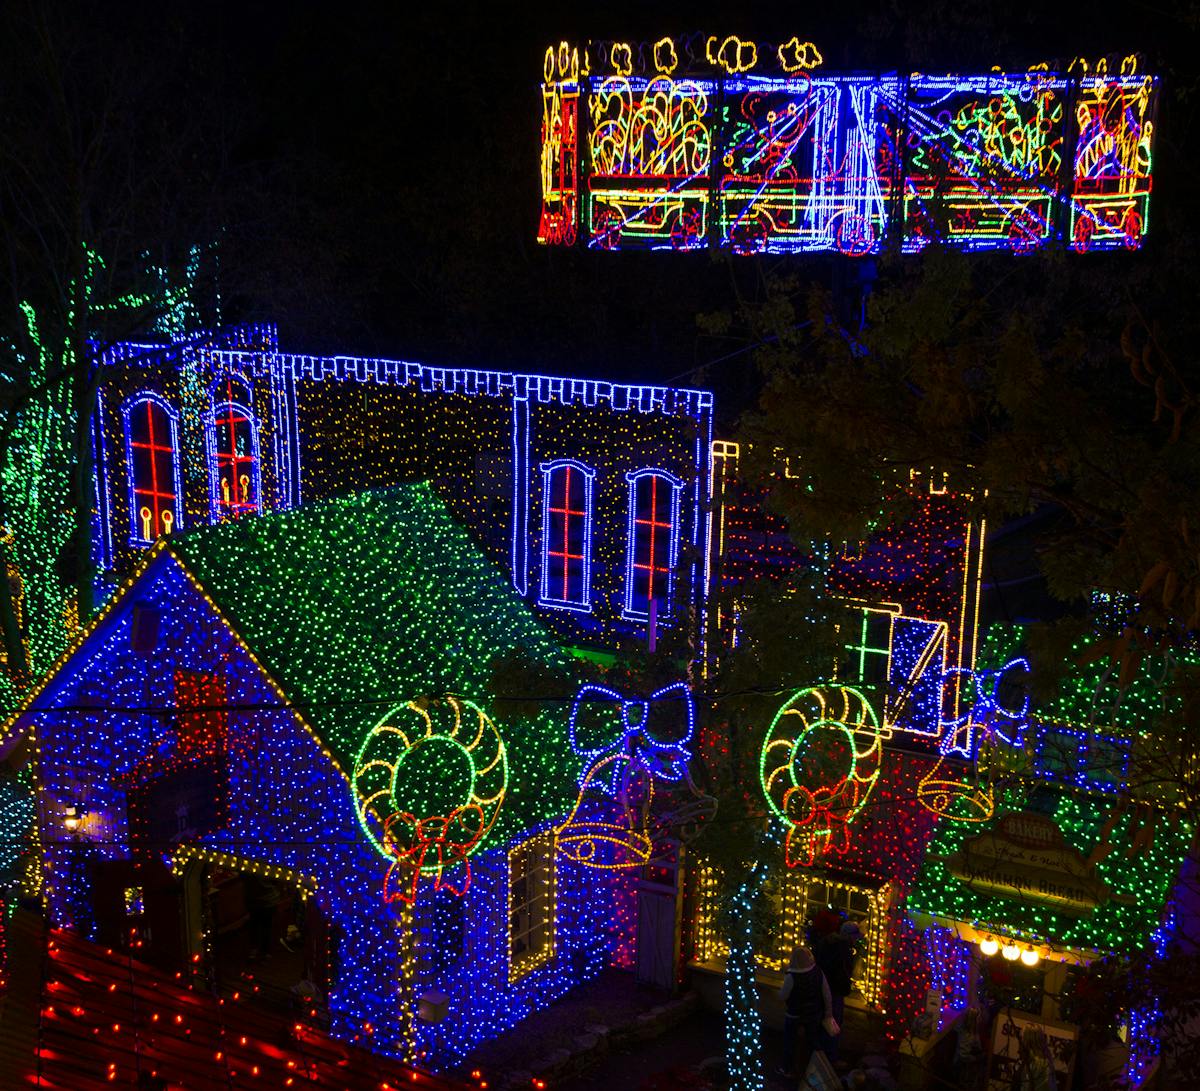 Silver Dollar City theme park in Branson, Mo. has unveiled its biggest, brightest Christmas celebration yet -- featuring 6.5 million LED lights. (Dave